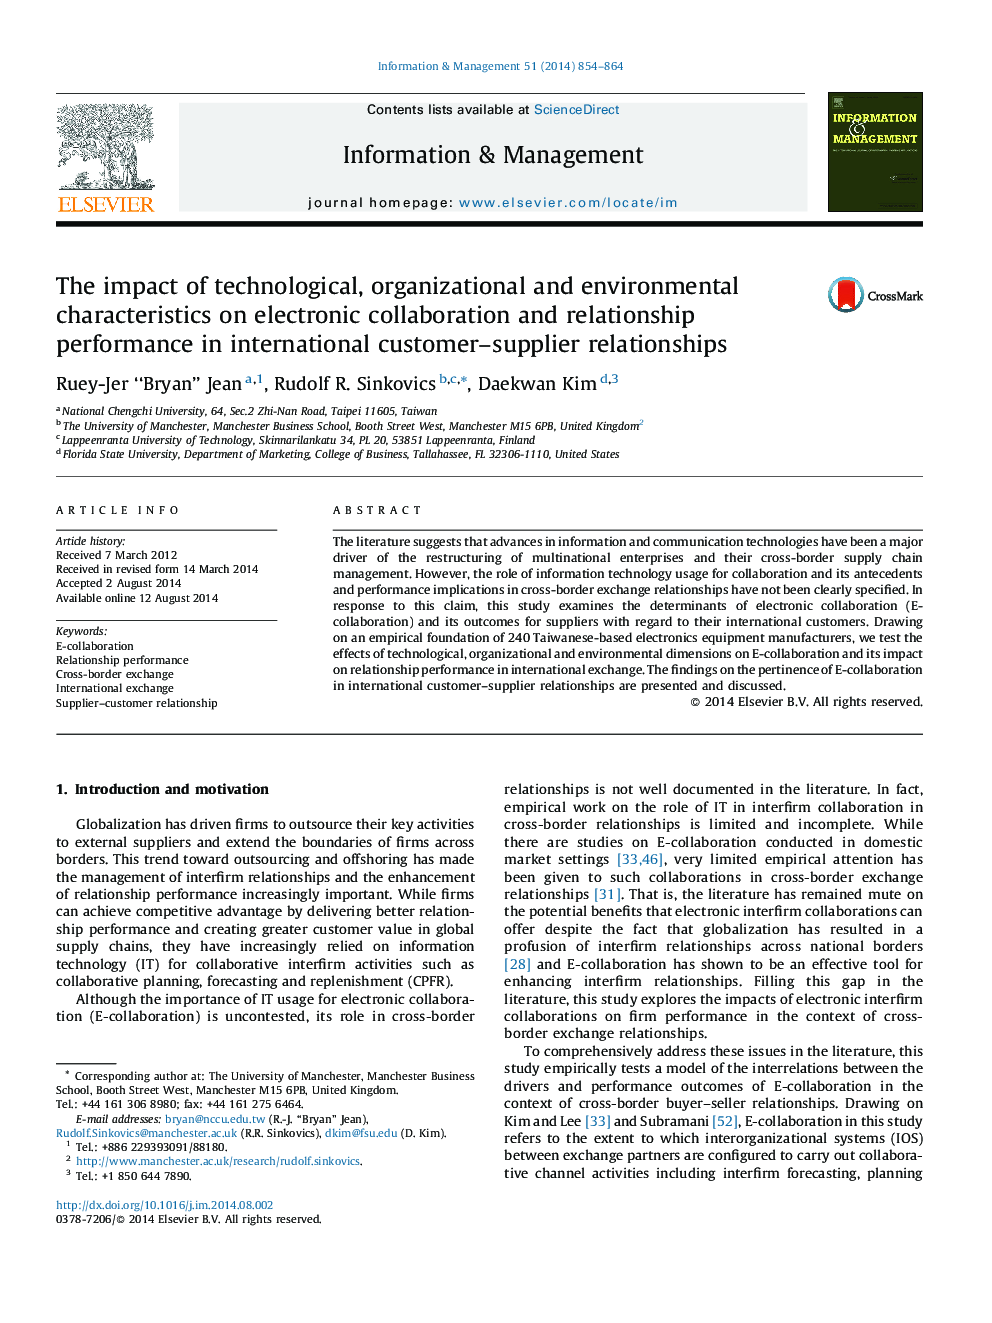 The impact of technological, organizational and environmental characteristics on electronic collaboration and relationship performance in international customer–supplier relationships